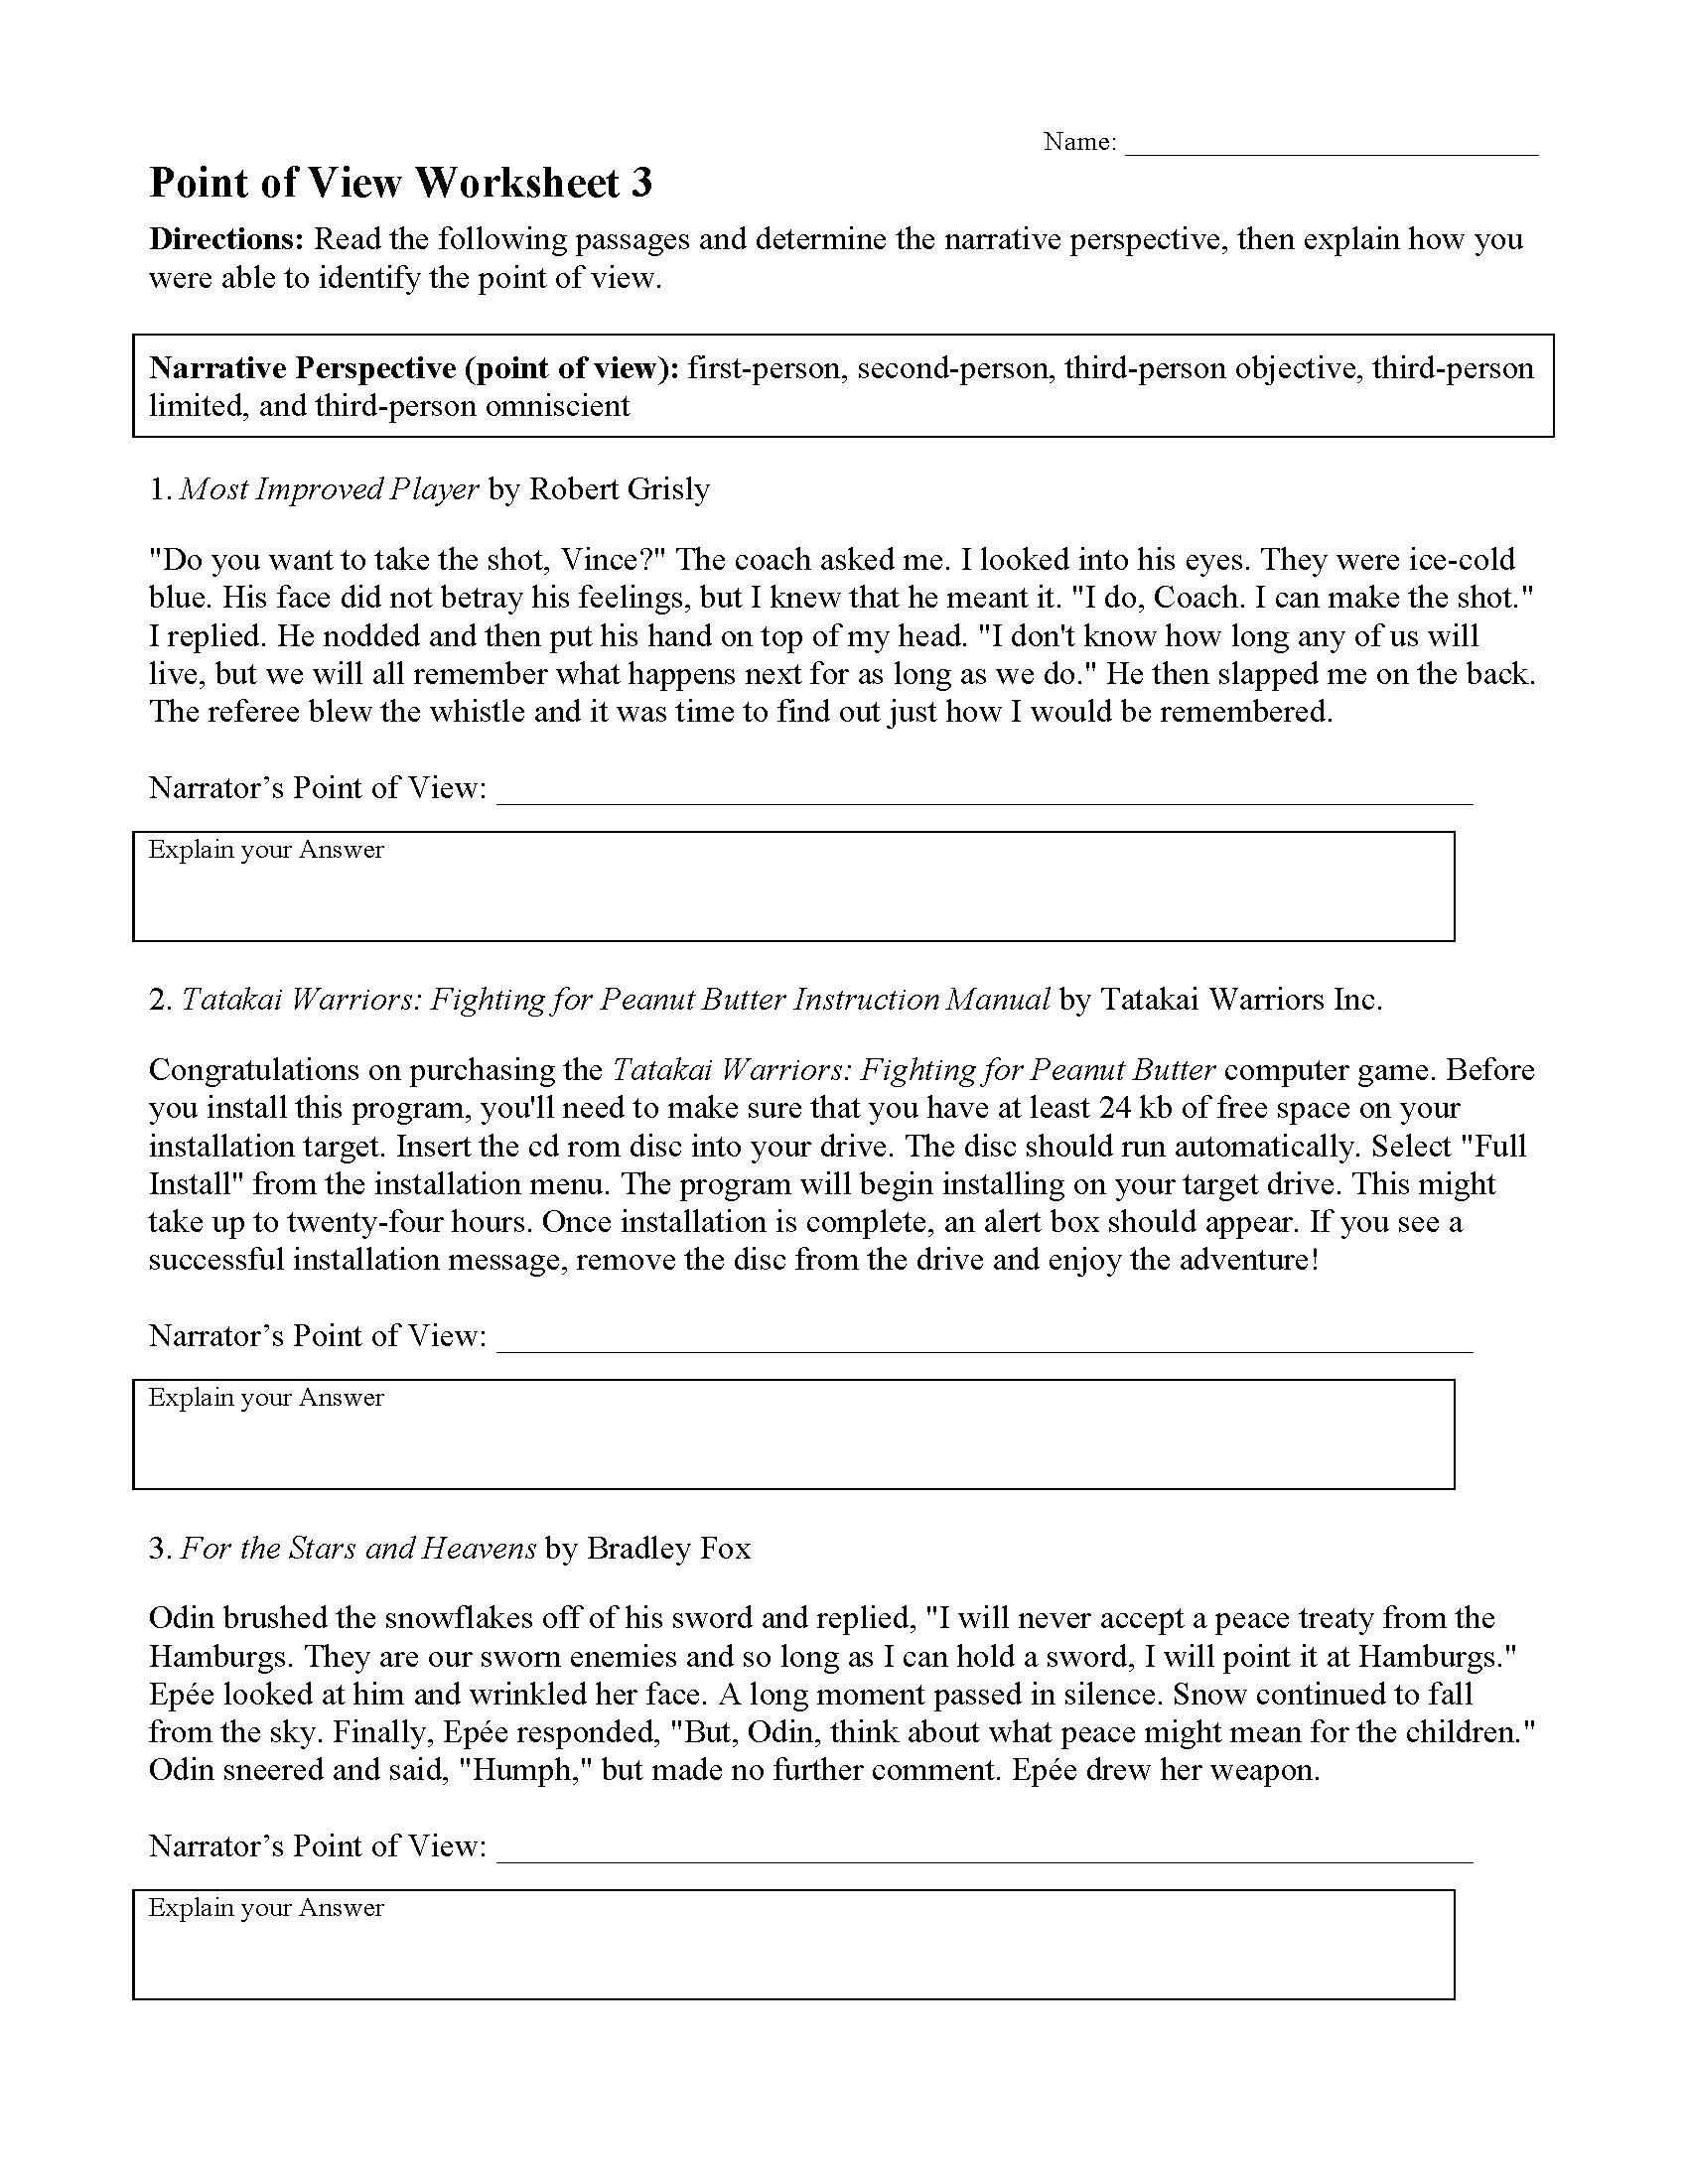 point-of-view-worksheet-3-preview